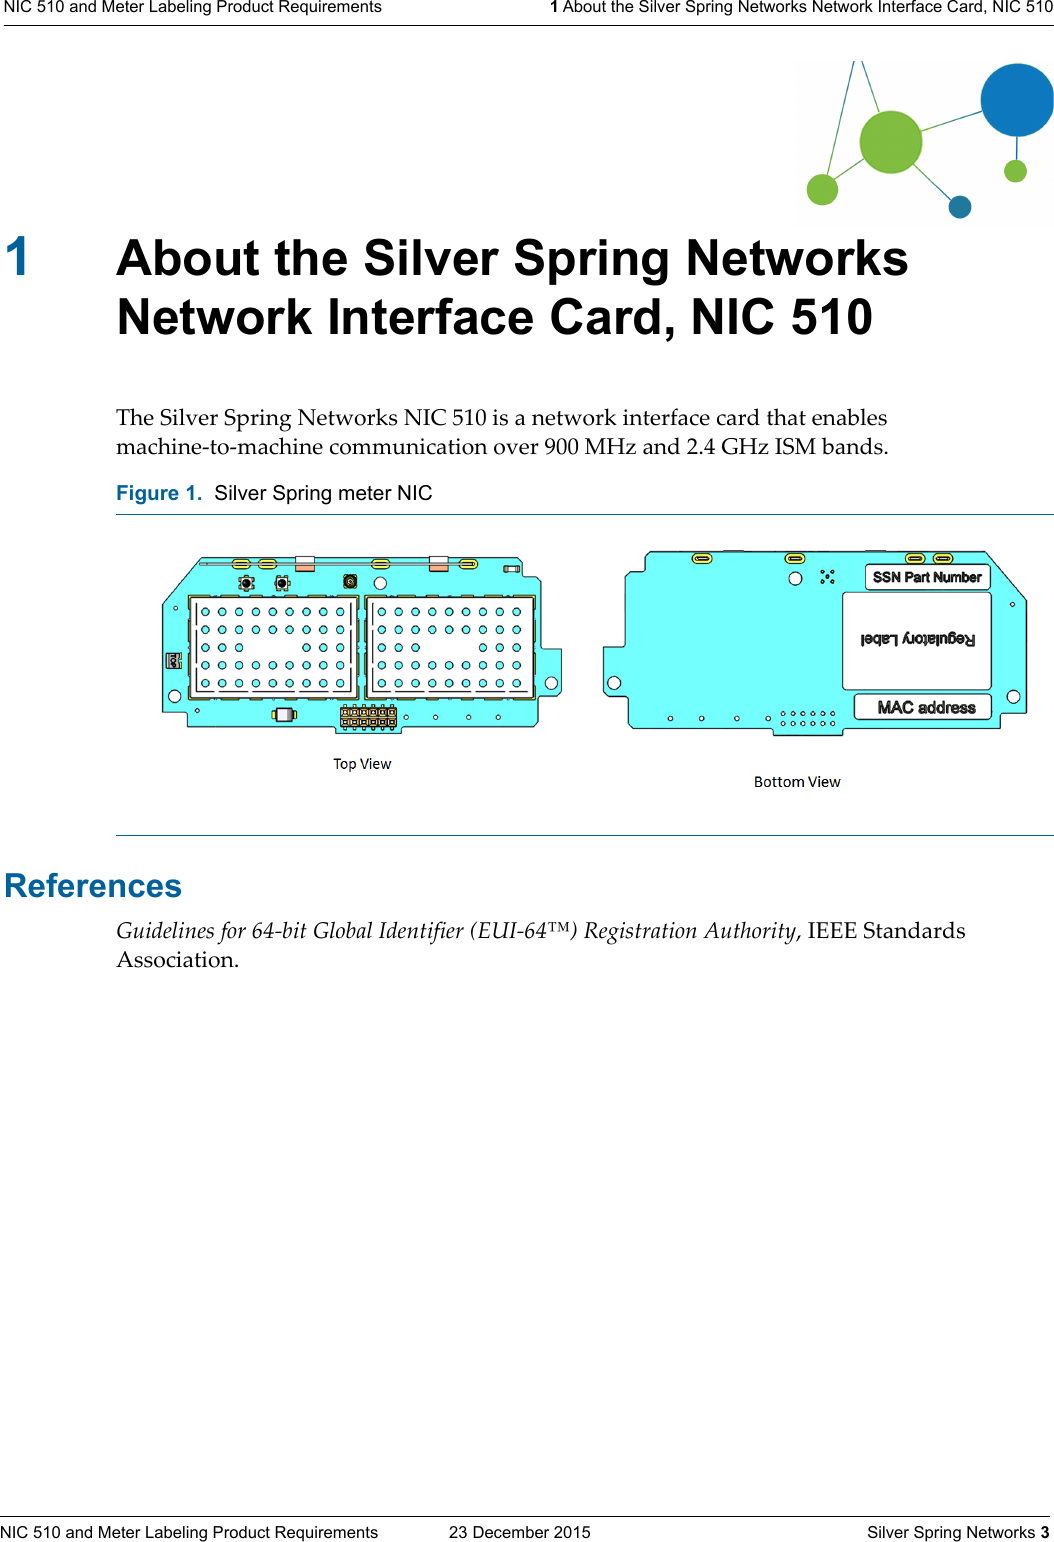 NIC 510 and Meter Labeling Product Requirements  23 December 2015    Silver Spring Networks 3NIC 510 and Meter Labeling Product Requirements 1 About the Silver Spring Networks Network Interface Card, NIC 5101About the Silver Spring Networks Network Interface Card, NIC 510The Silver Spring Networks NIC 510 is a network interface card that enables machine-to-machine communication over 900 MHz and 2.4 GHz ISM bands. ReferencesGuidelines for 64-bit Global Identifier (EUI-64™) Registration Authority, IEEE Standards Association.Figure 1.  Silver Spring meter NIC